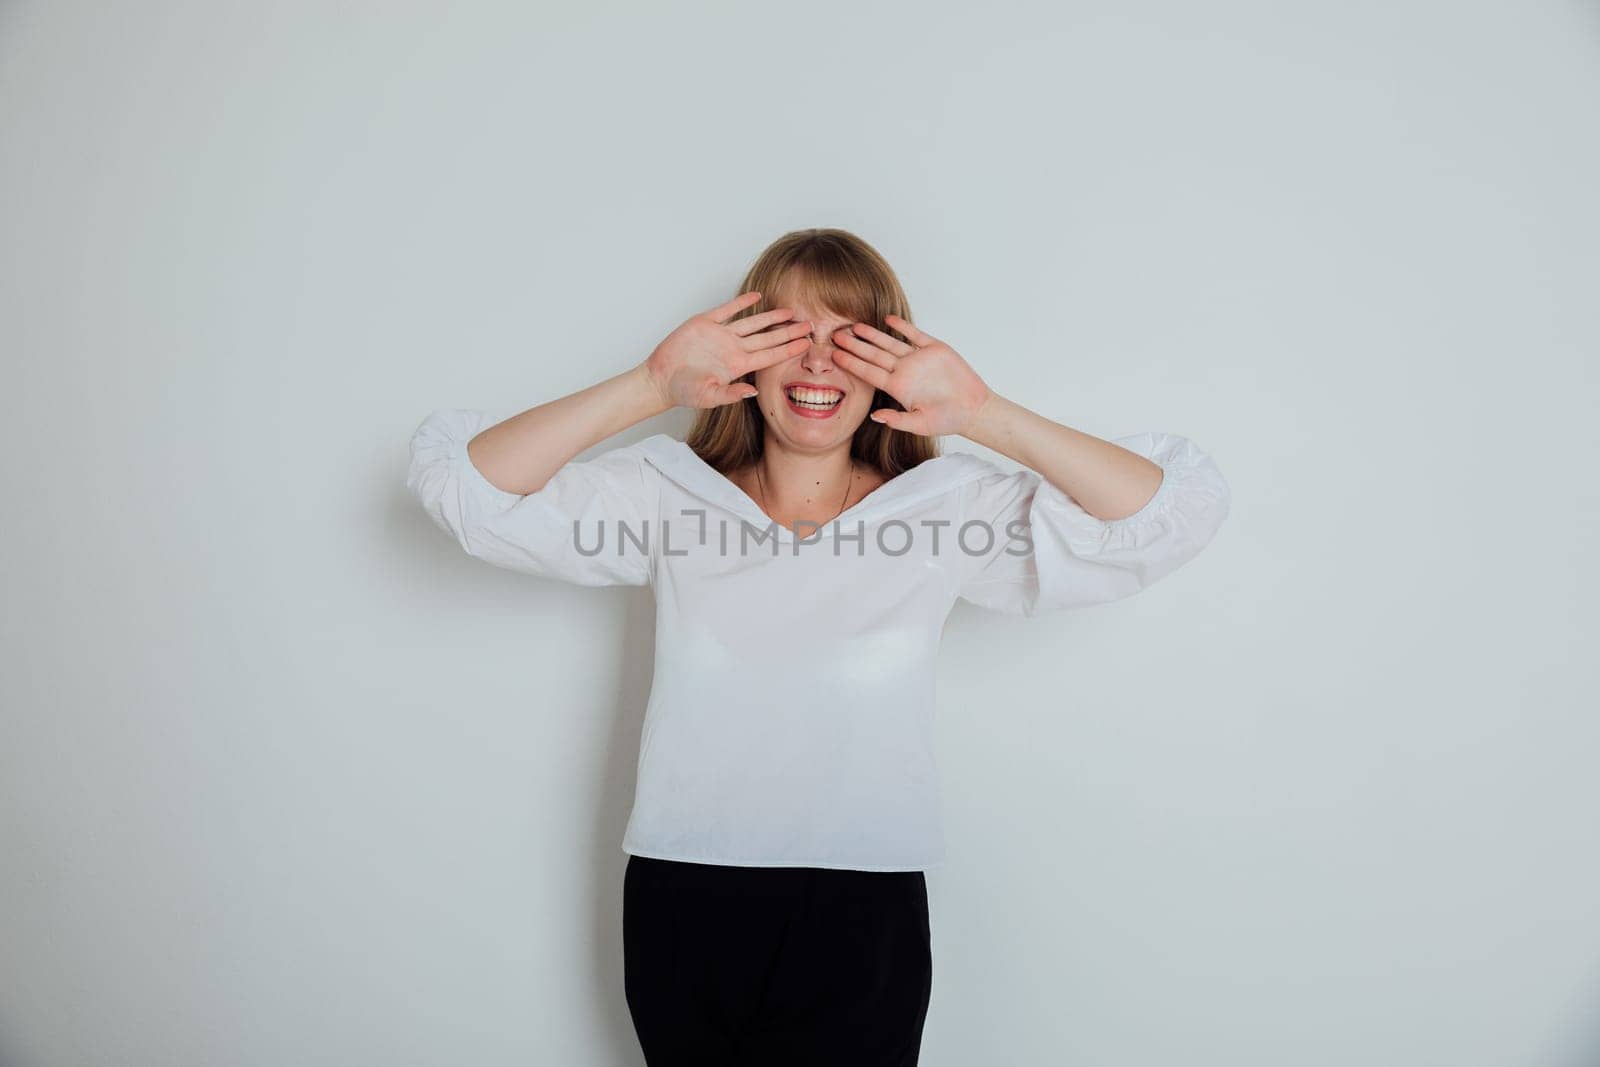 A woman closes her eyes with her hands against a light background